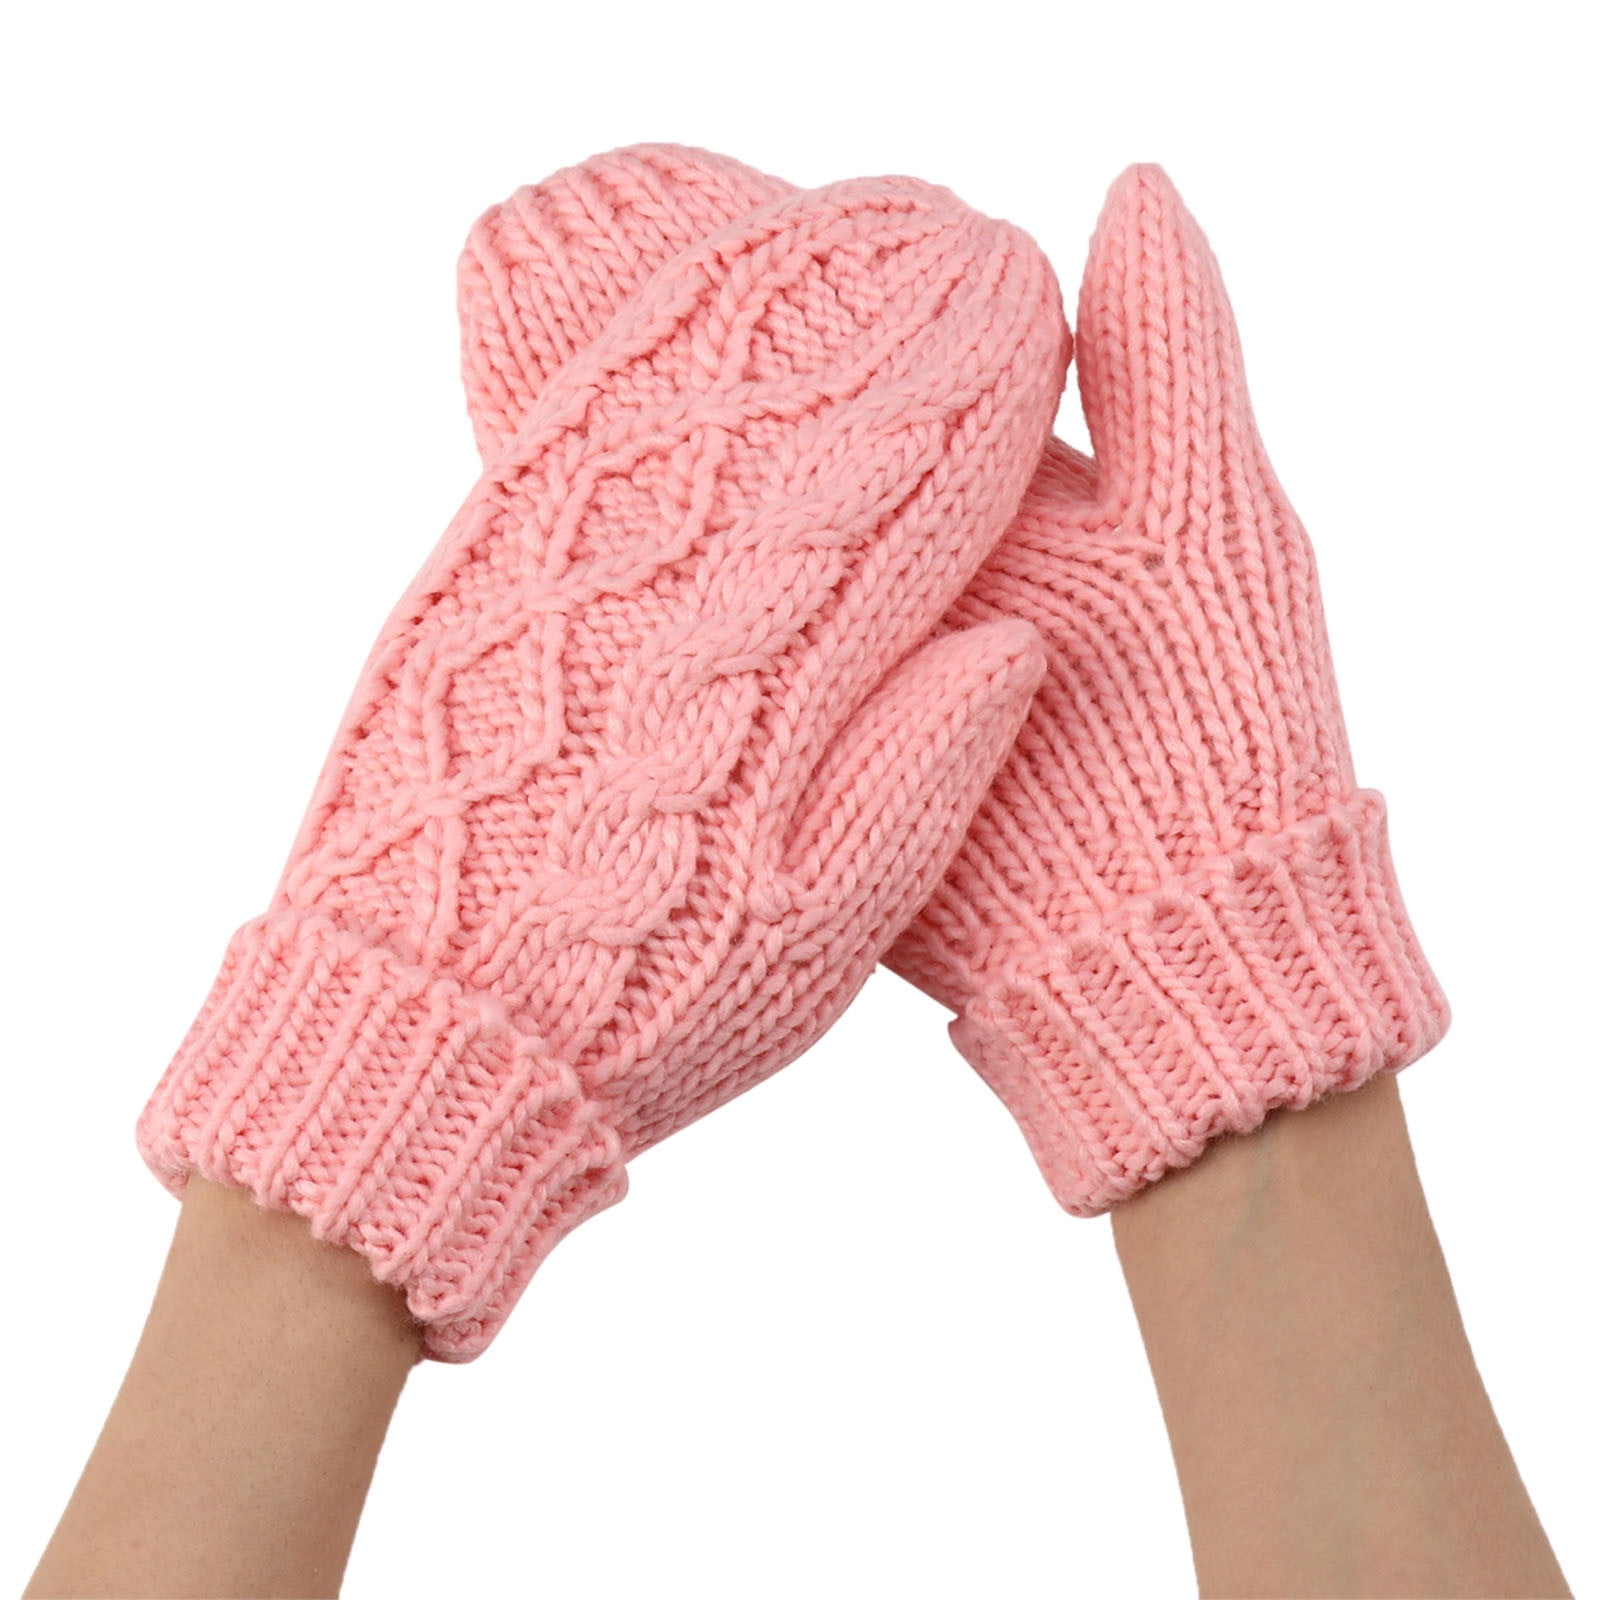 ZHIZAIHU Solid Color Knit Mitten Convertible Flip Gloves for Women Men  Winter Thermal Gloves Touch Screen Writing Gloves White One Size 